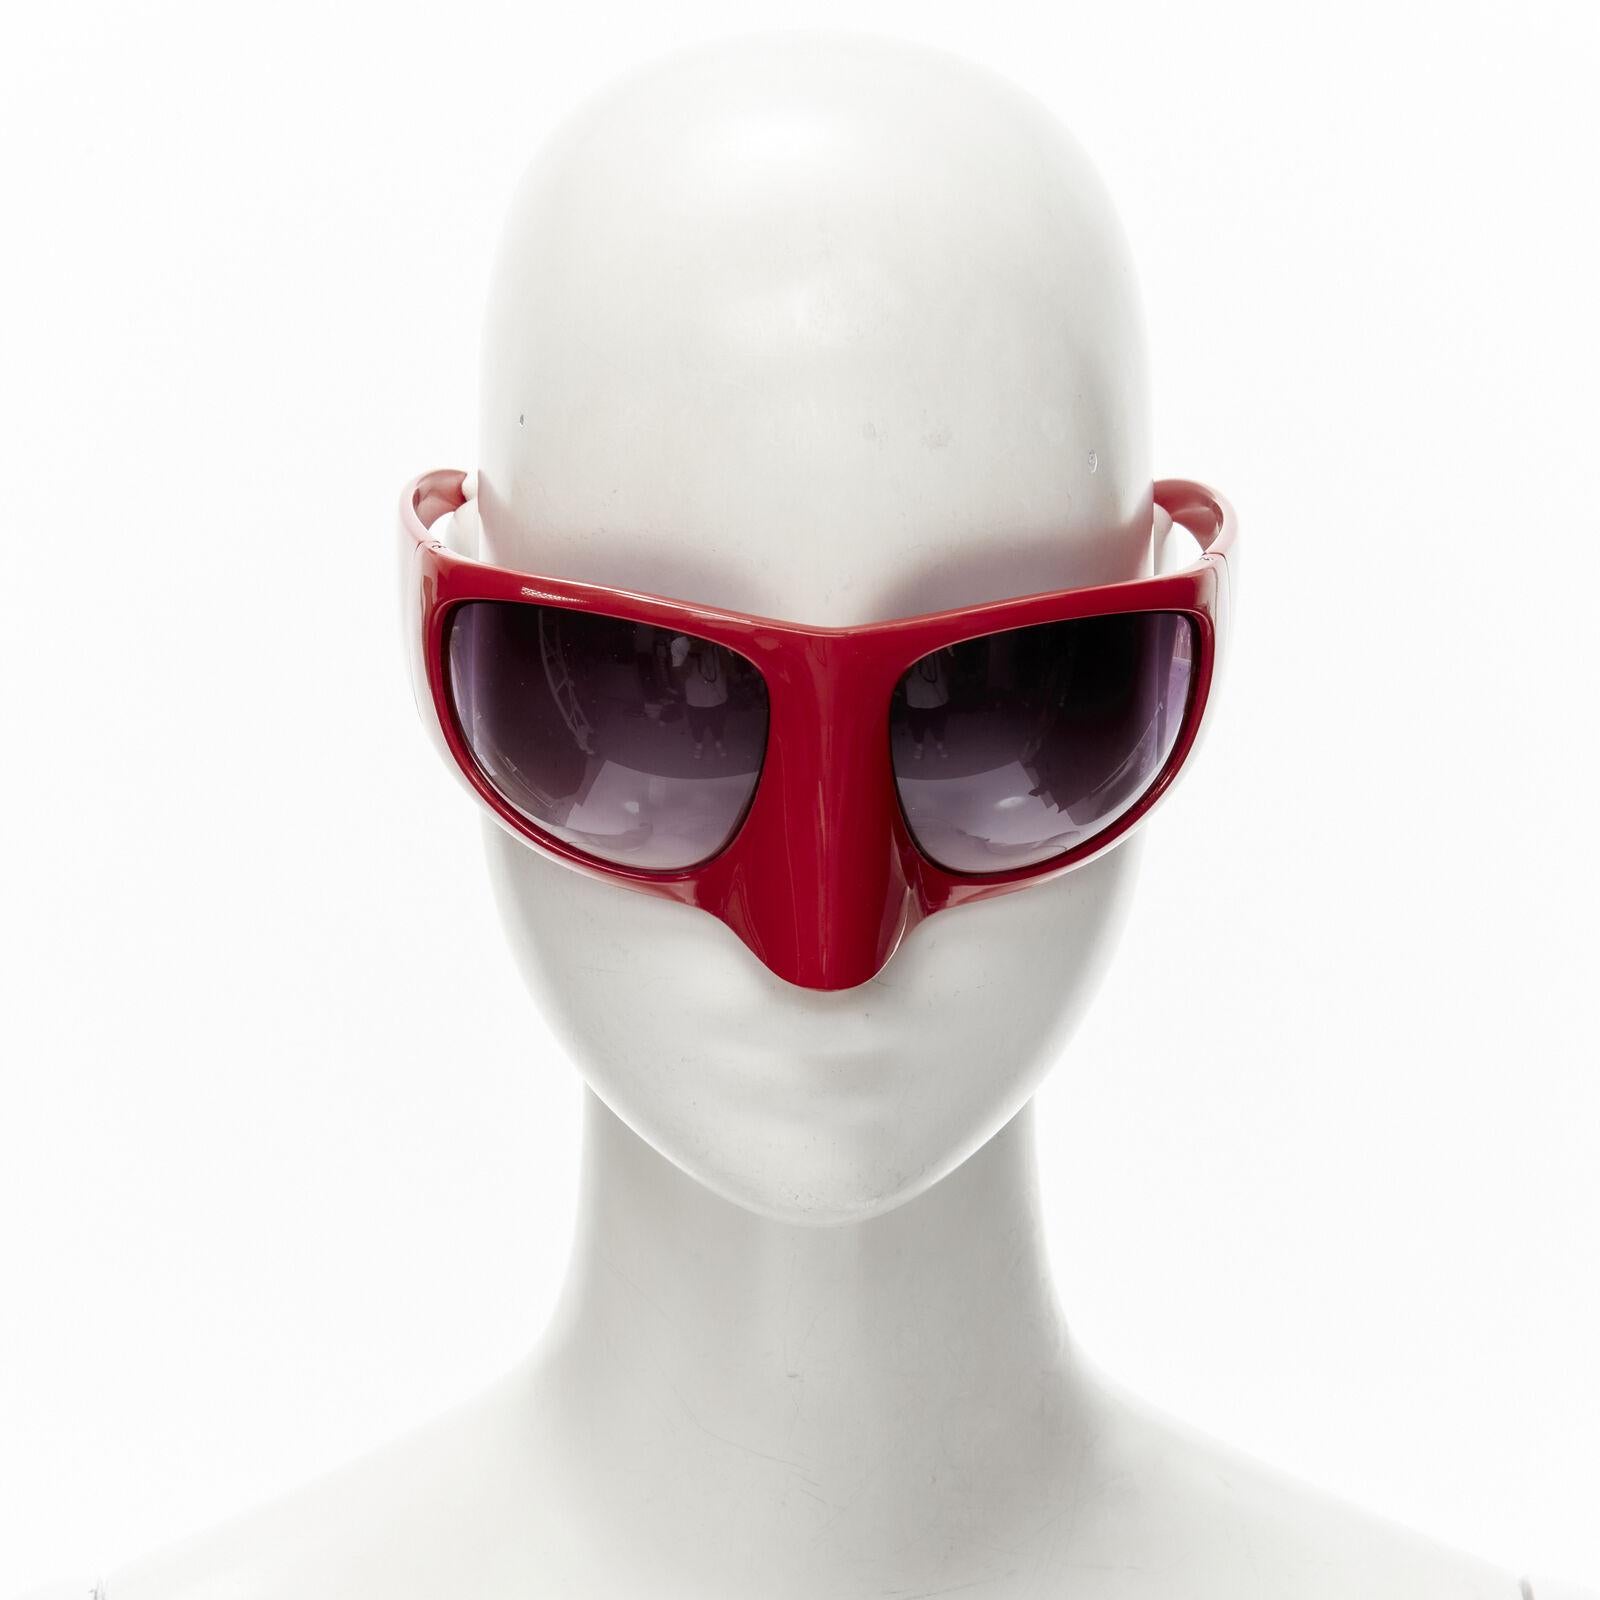 rare BERNARD WILLHELM LINDA FARROW PW003 red mould nose masked sunglasses
Reference: ANWU/A00846
Brand: Bernard Willhelm
Model: PW003
Material: Plastic
Color: Red, Black
Pattern: Solid
Made in: China

CONDITION:
Condition: Excellent, this item was